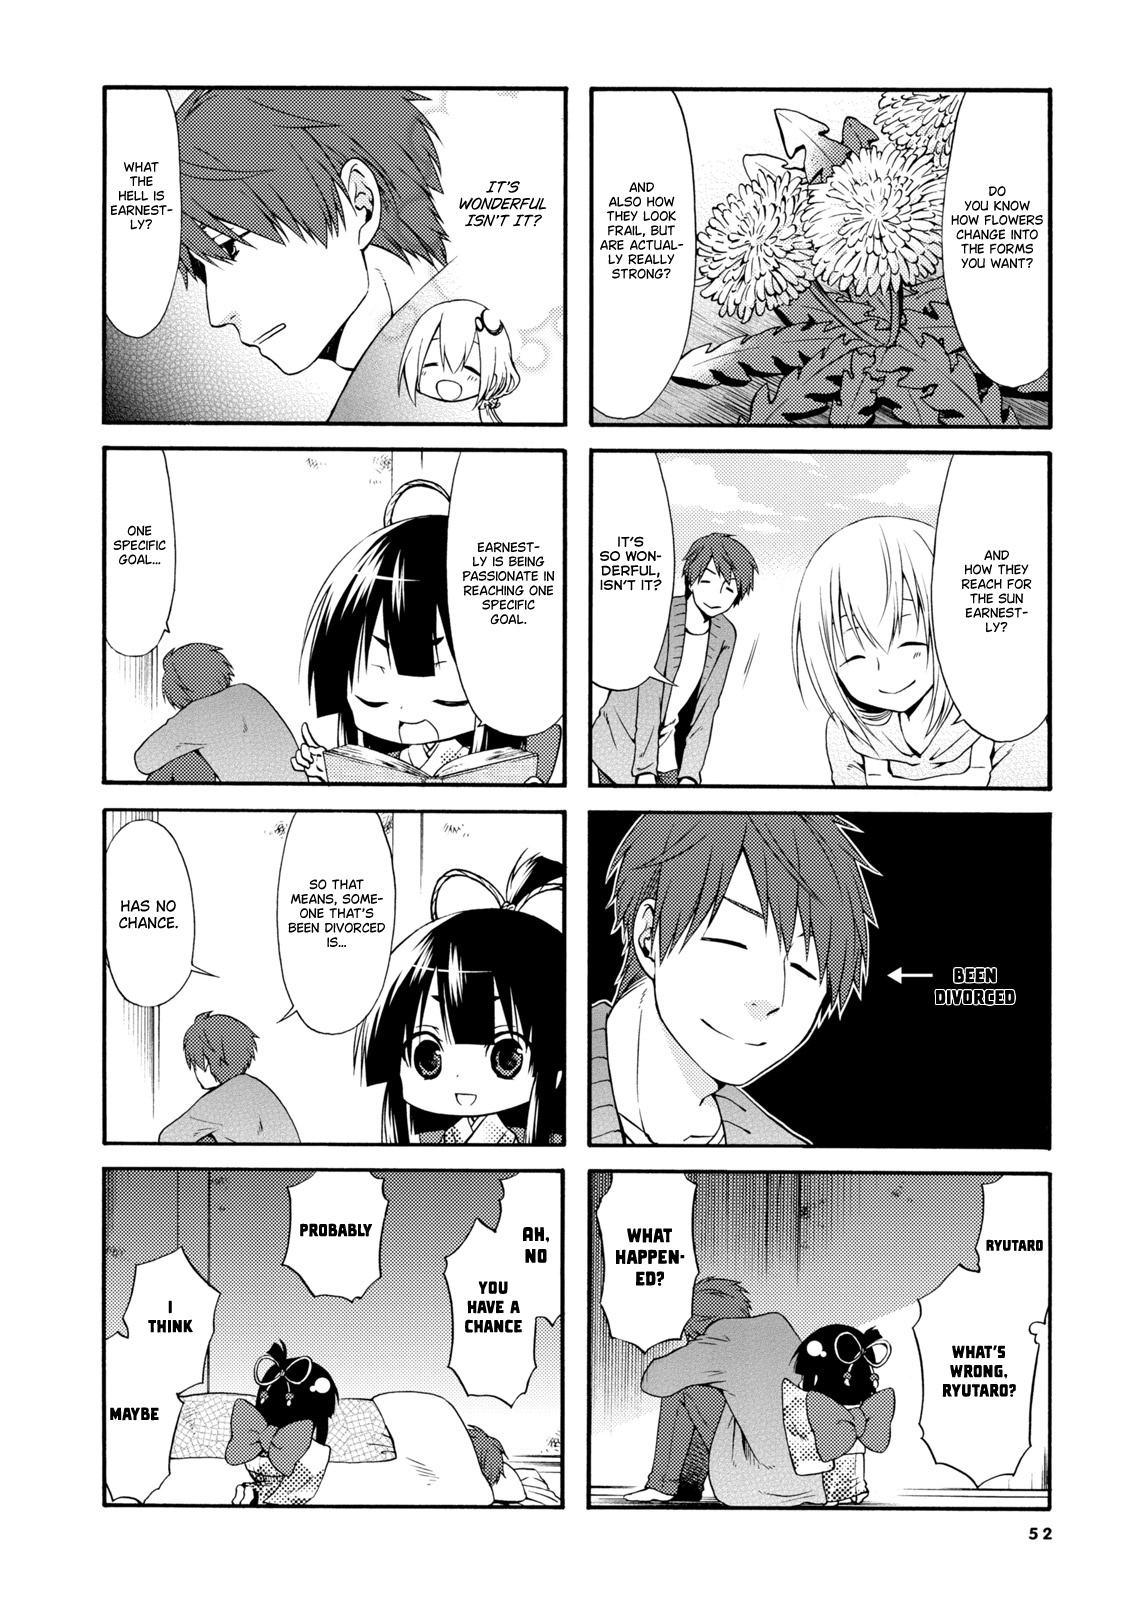 A Zashikiwarashi Lives In That Apartment Vol.1 Chapter 7 - Picture 2